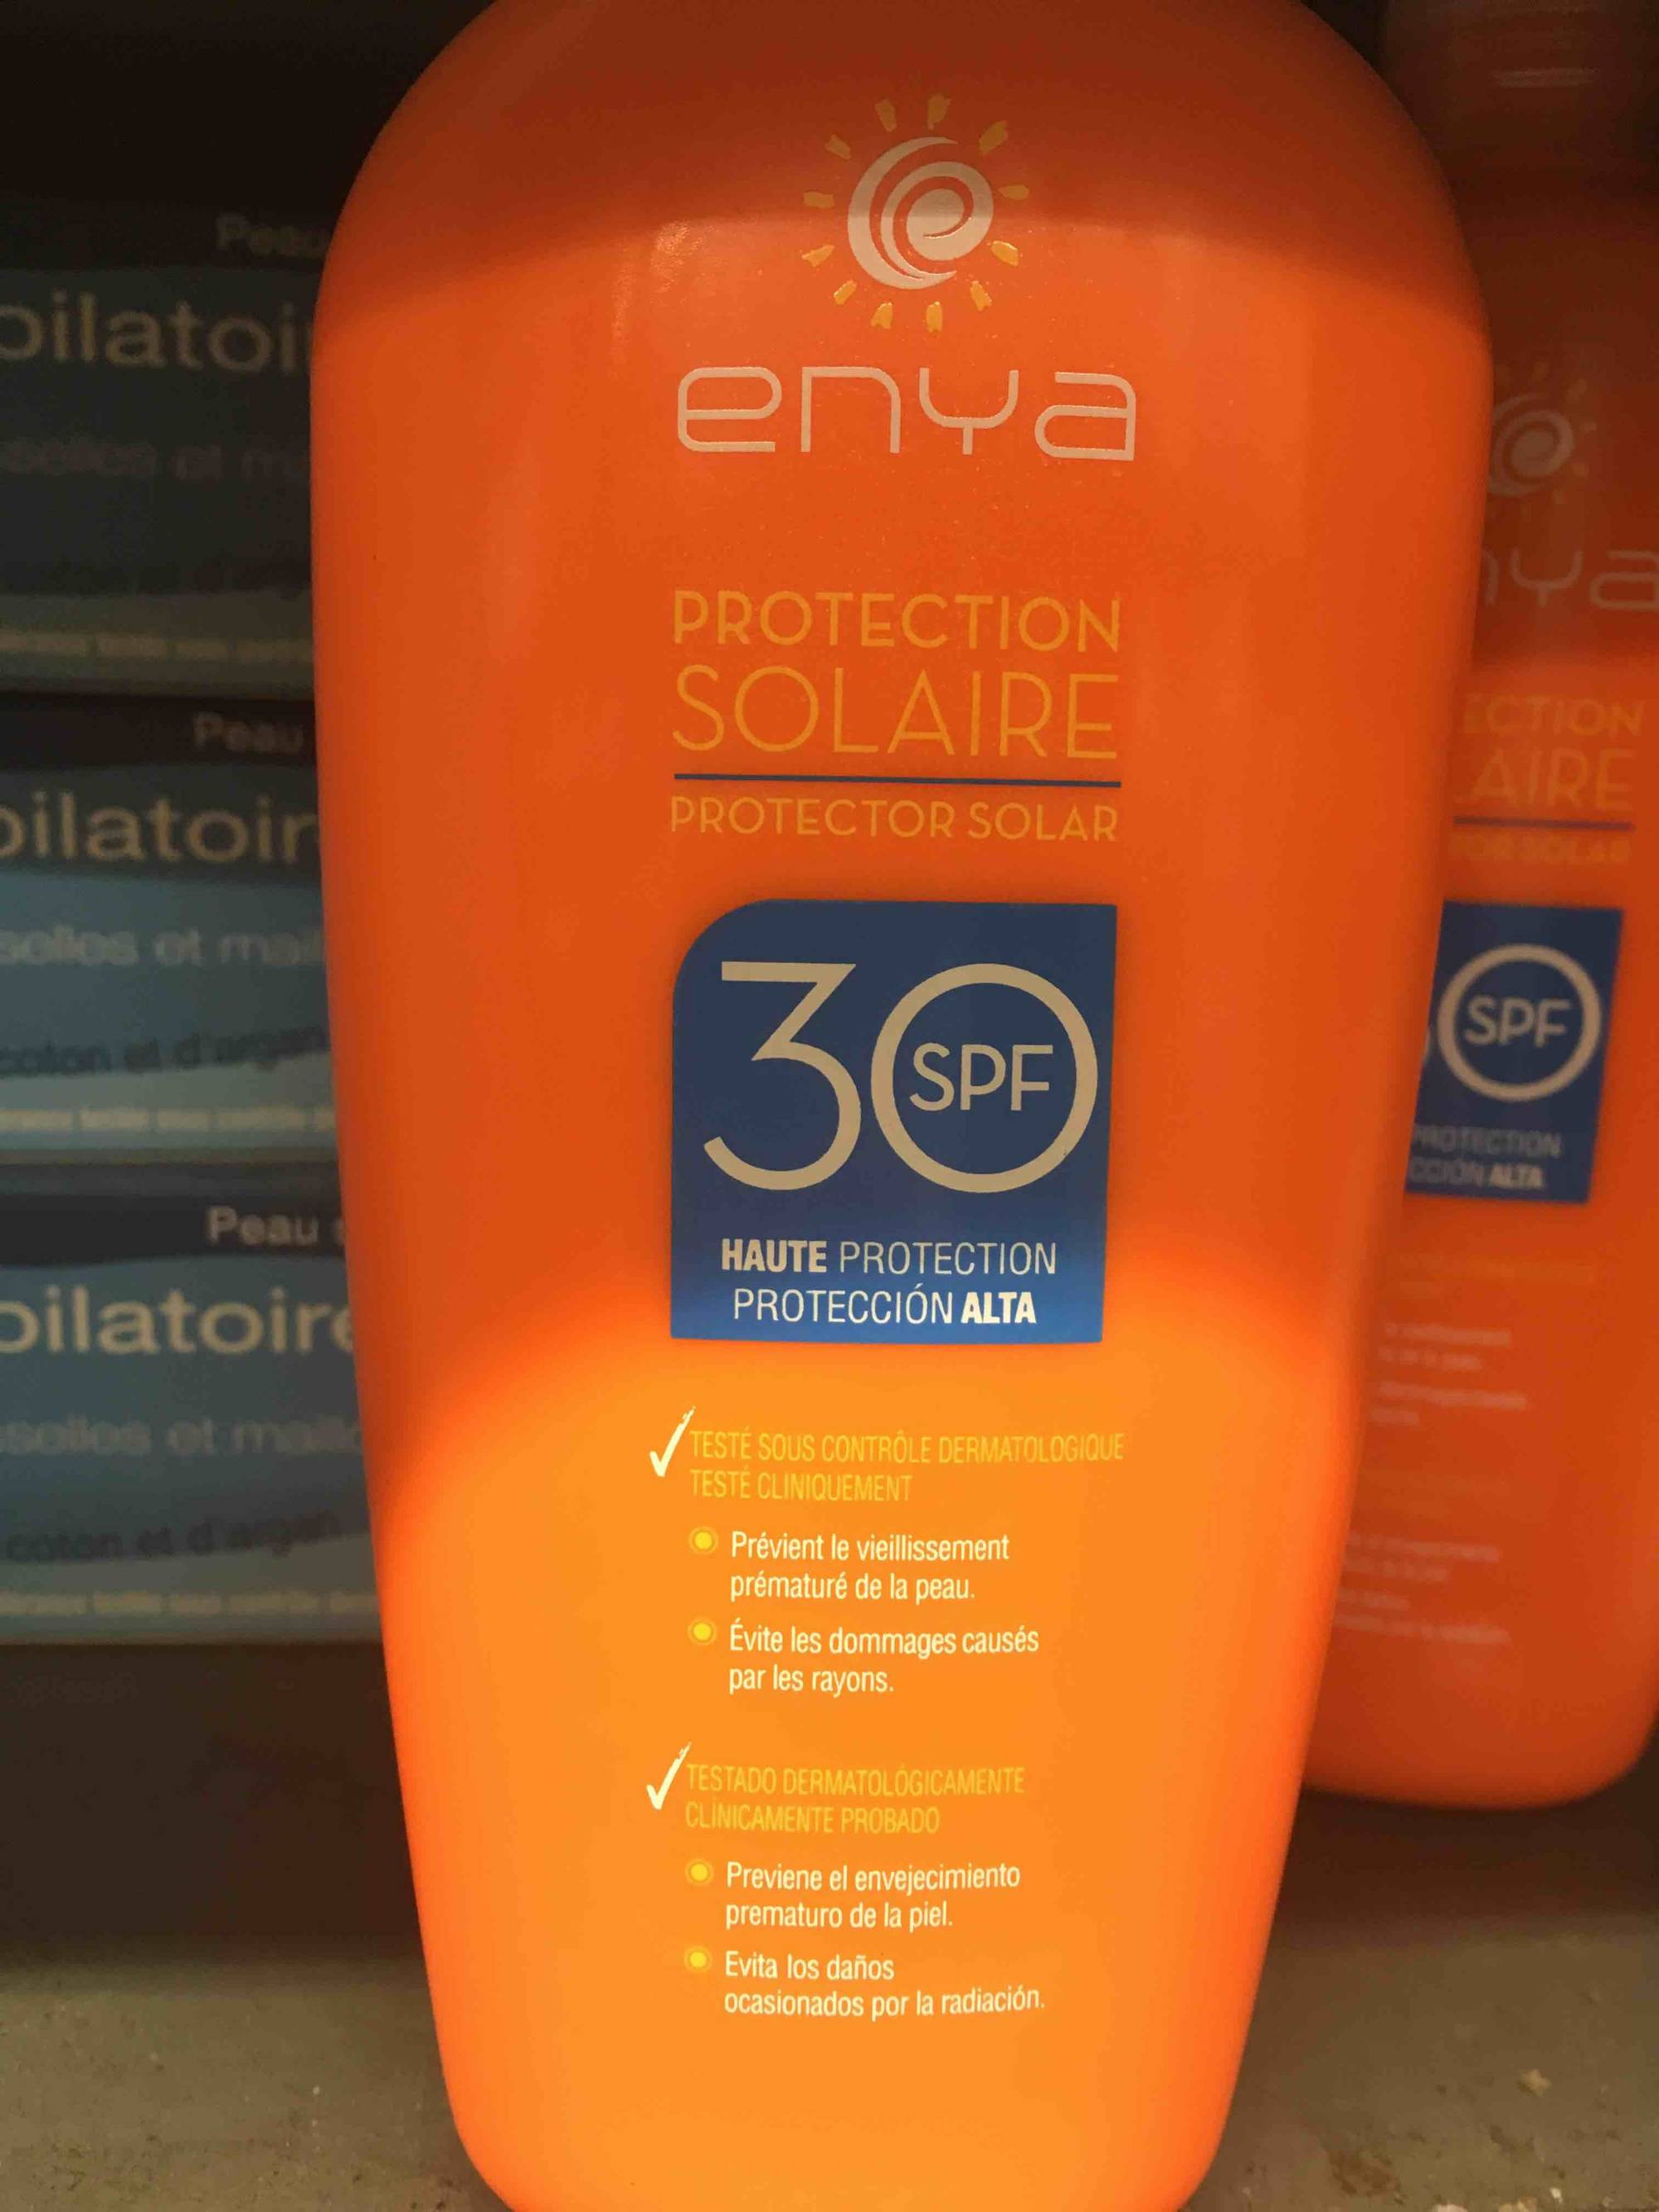 ENYA - Protection solaire 3SPF